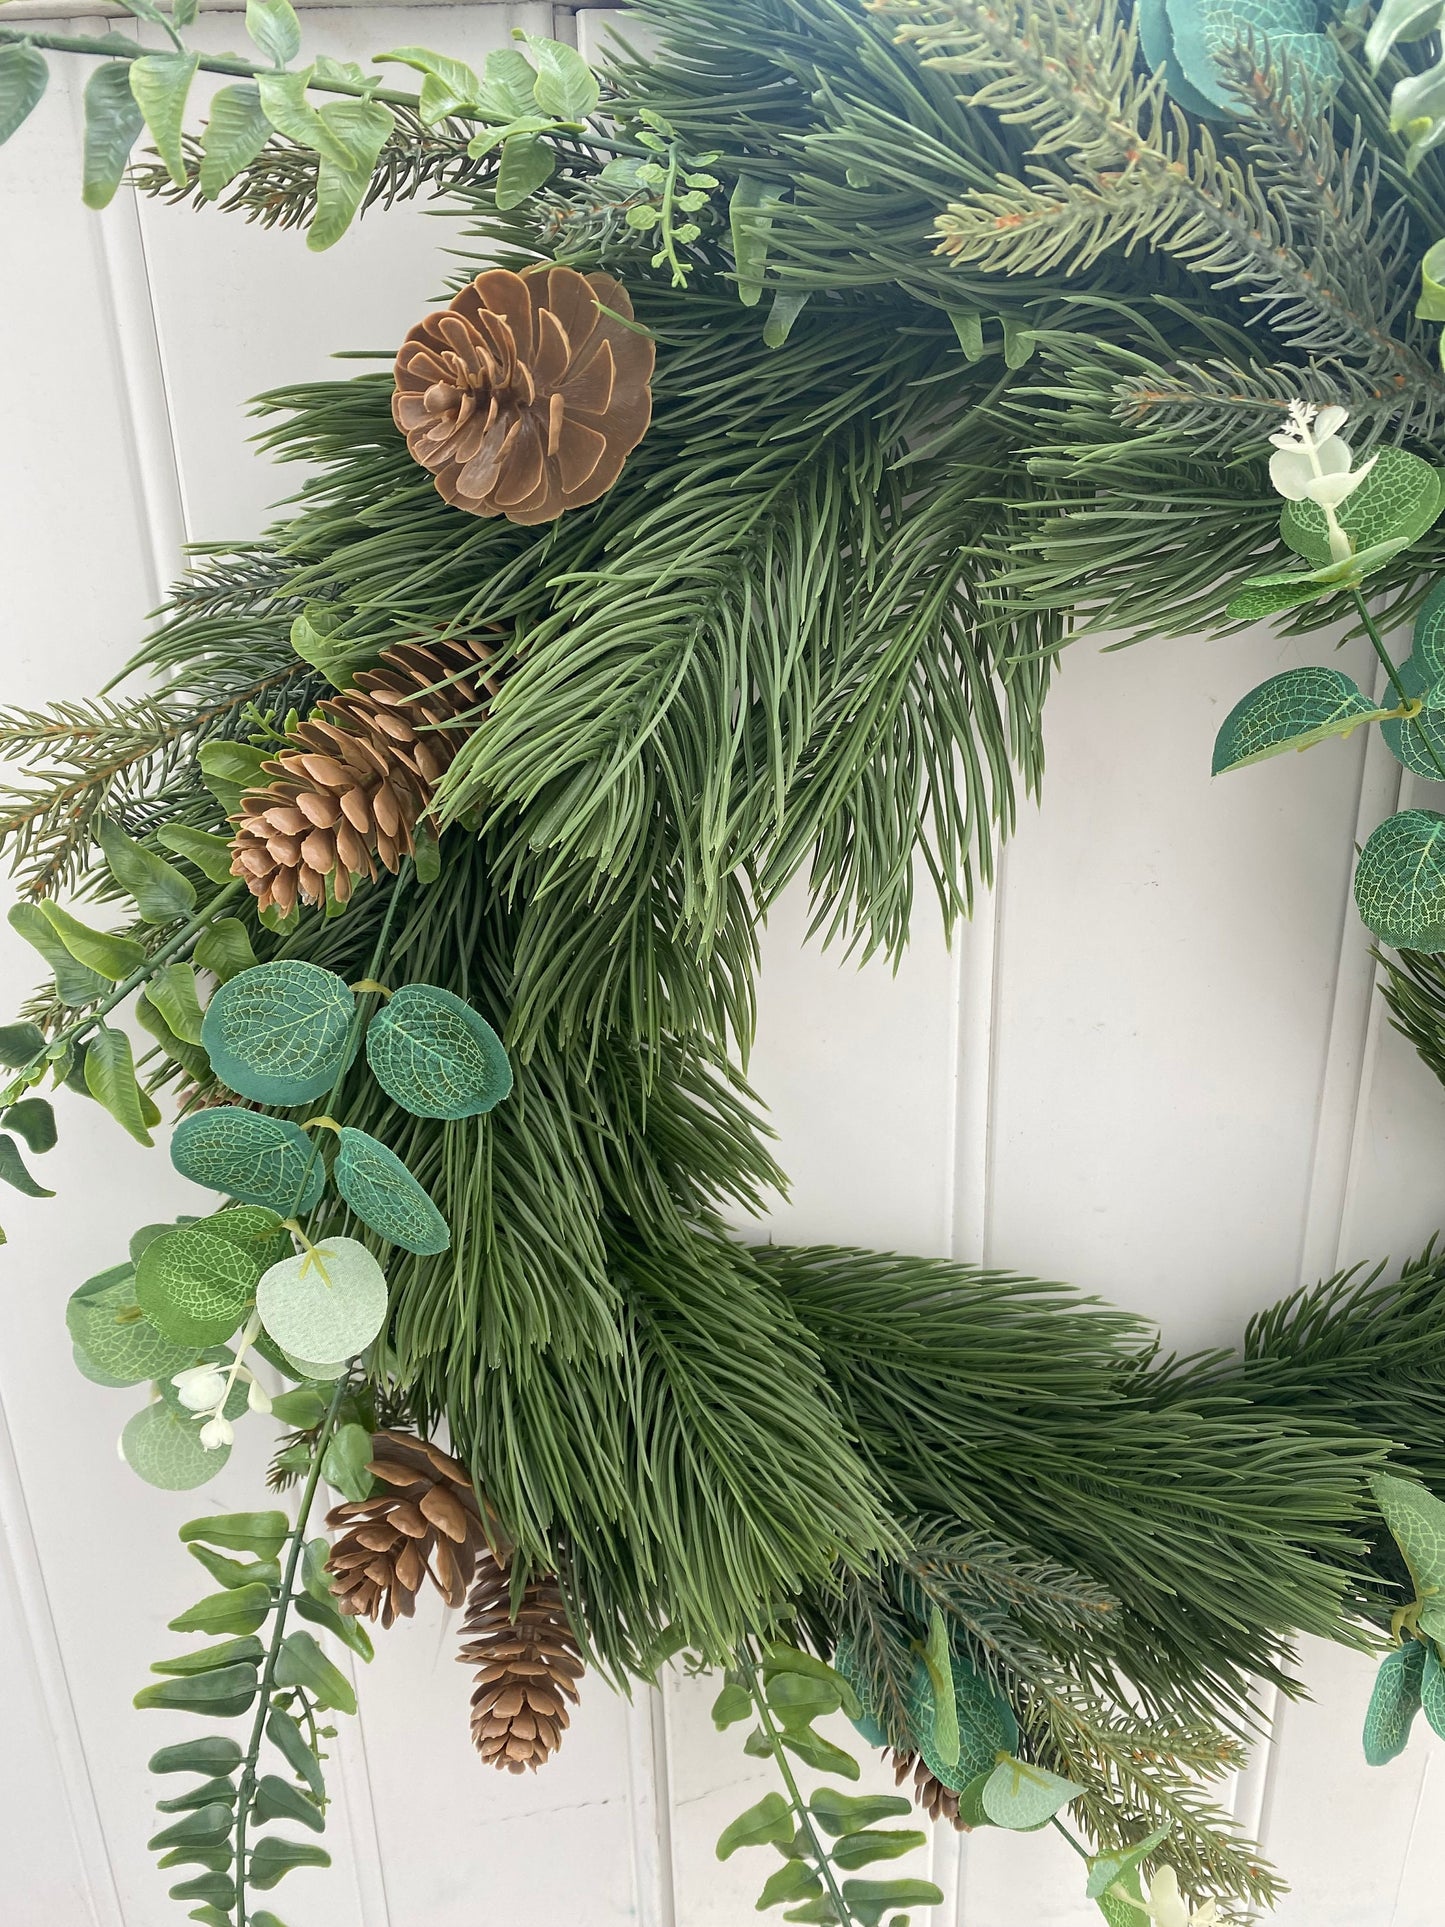 Large 60cm Plastic Christmas Wreath with Pine Spruce, Cones and Eucalyptus